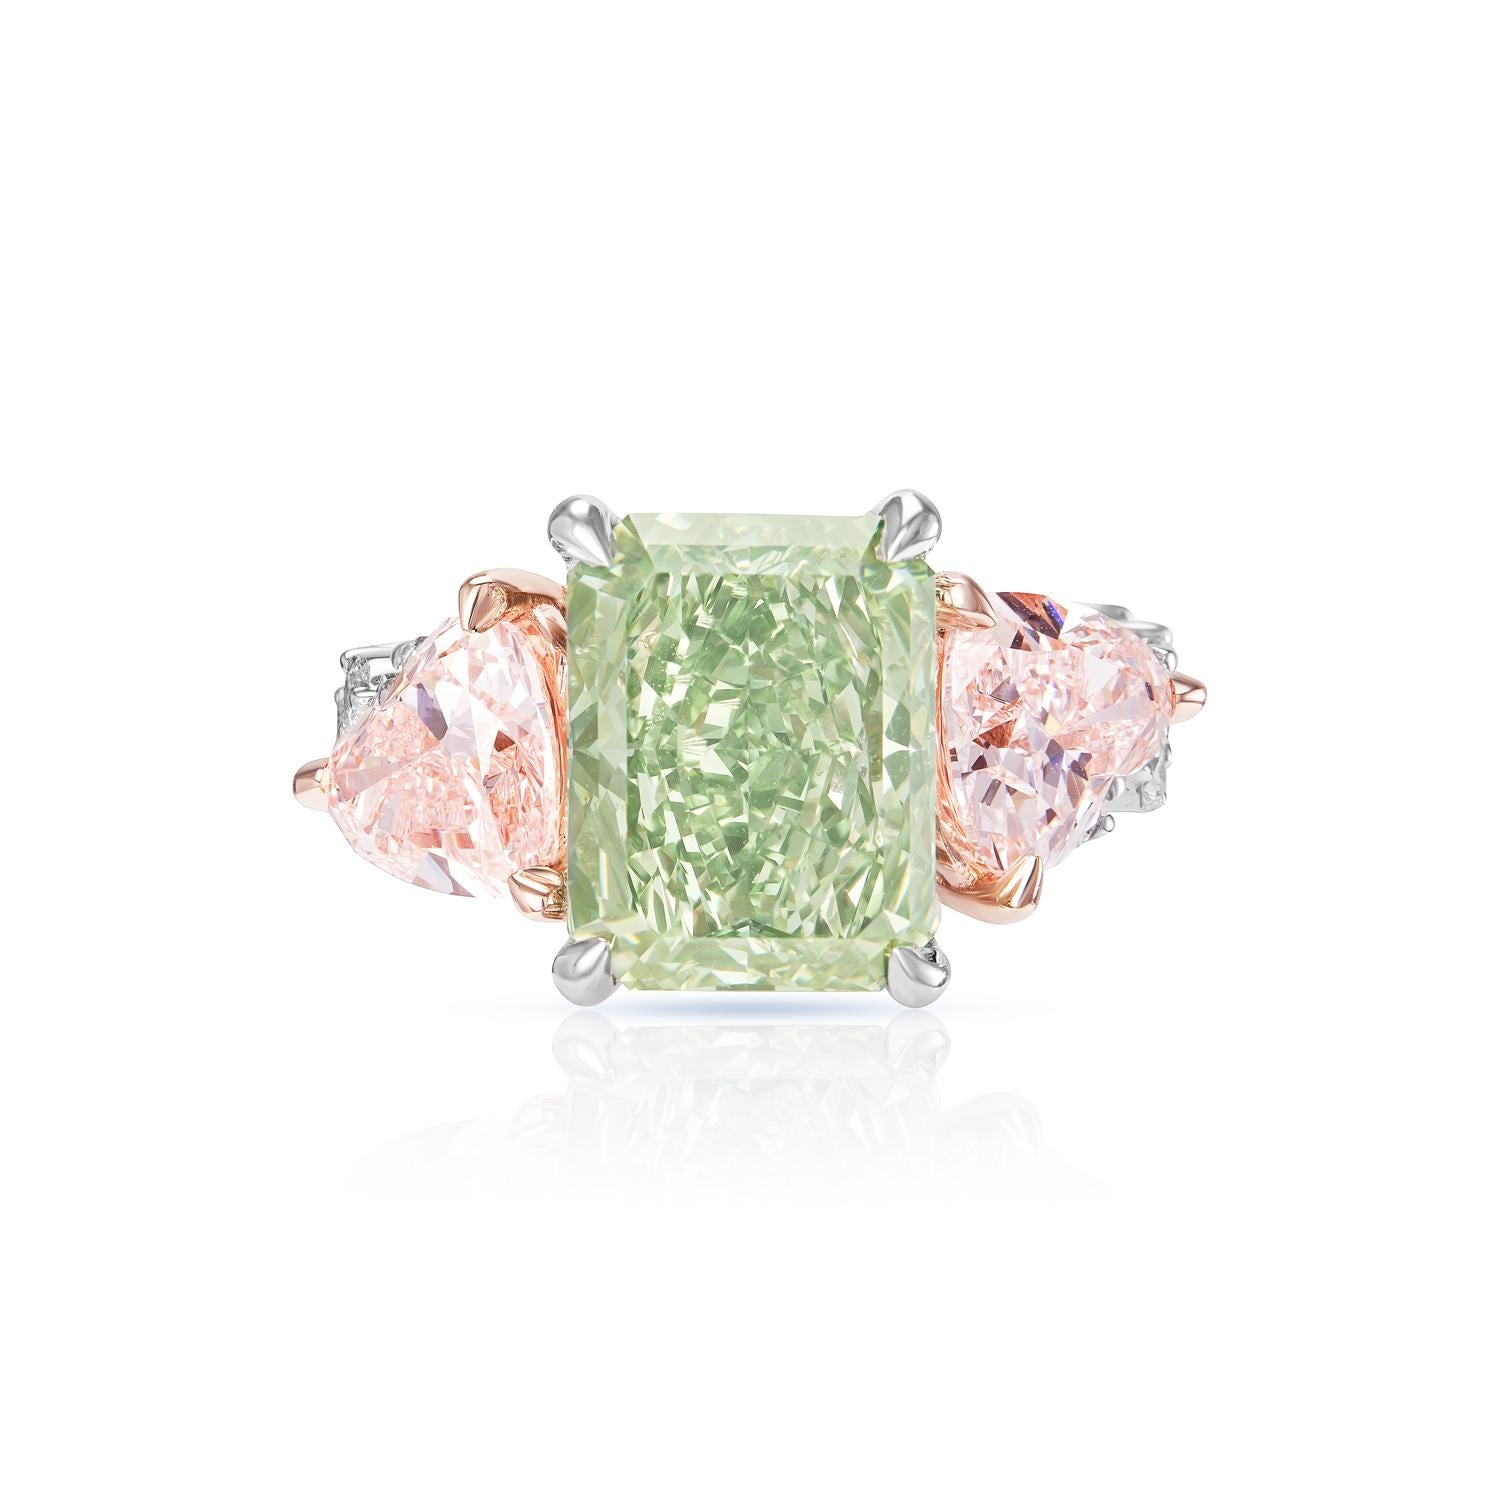 Looking for a truly unique and stunning engagement ring? Look no further than a center earth-mined diamond. This 6.05 carat radiant cut stone is beautifully crafted, boasting a flawless Fancy Intense Green color and excellent clarity. The ring